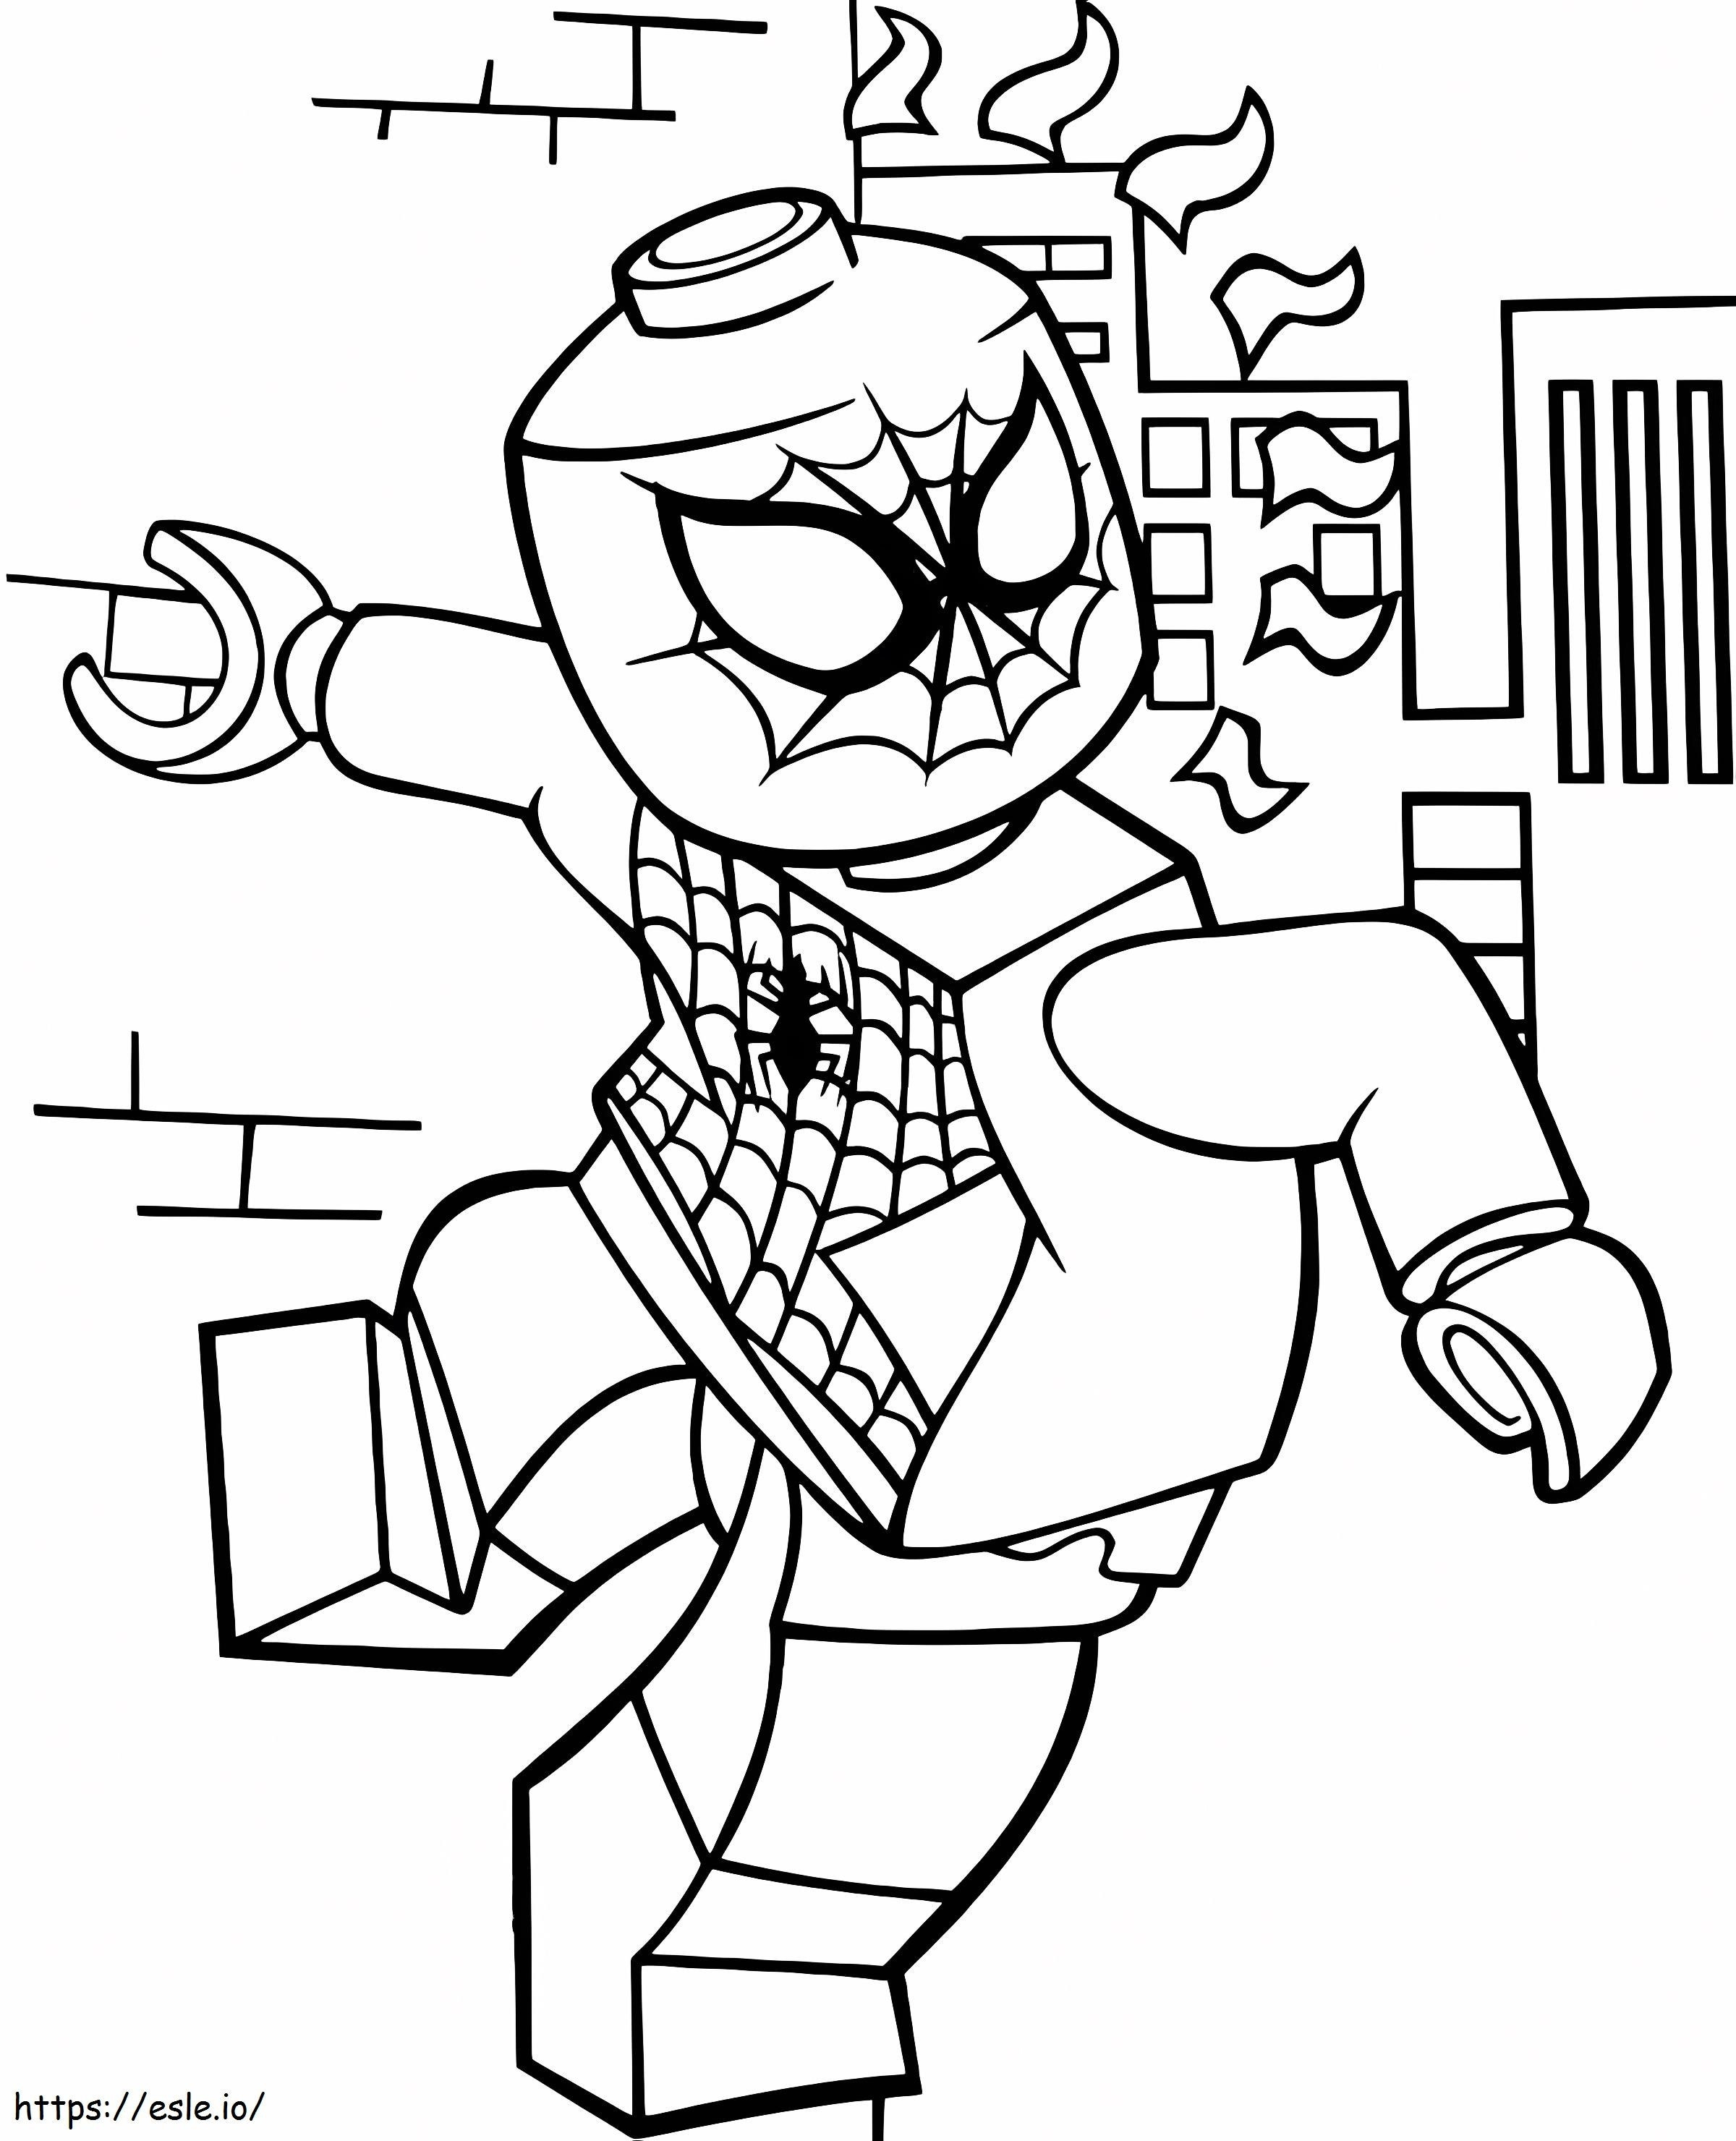 Lego Spiderman 2 coloring page